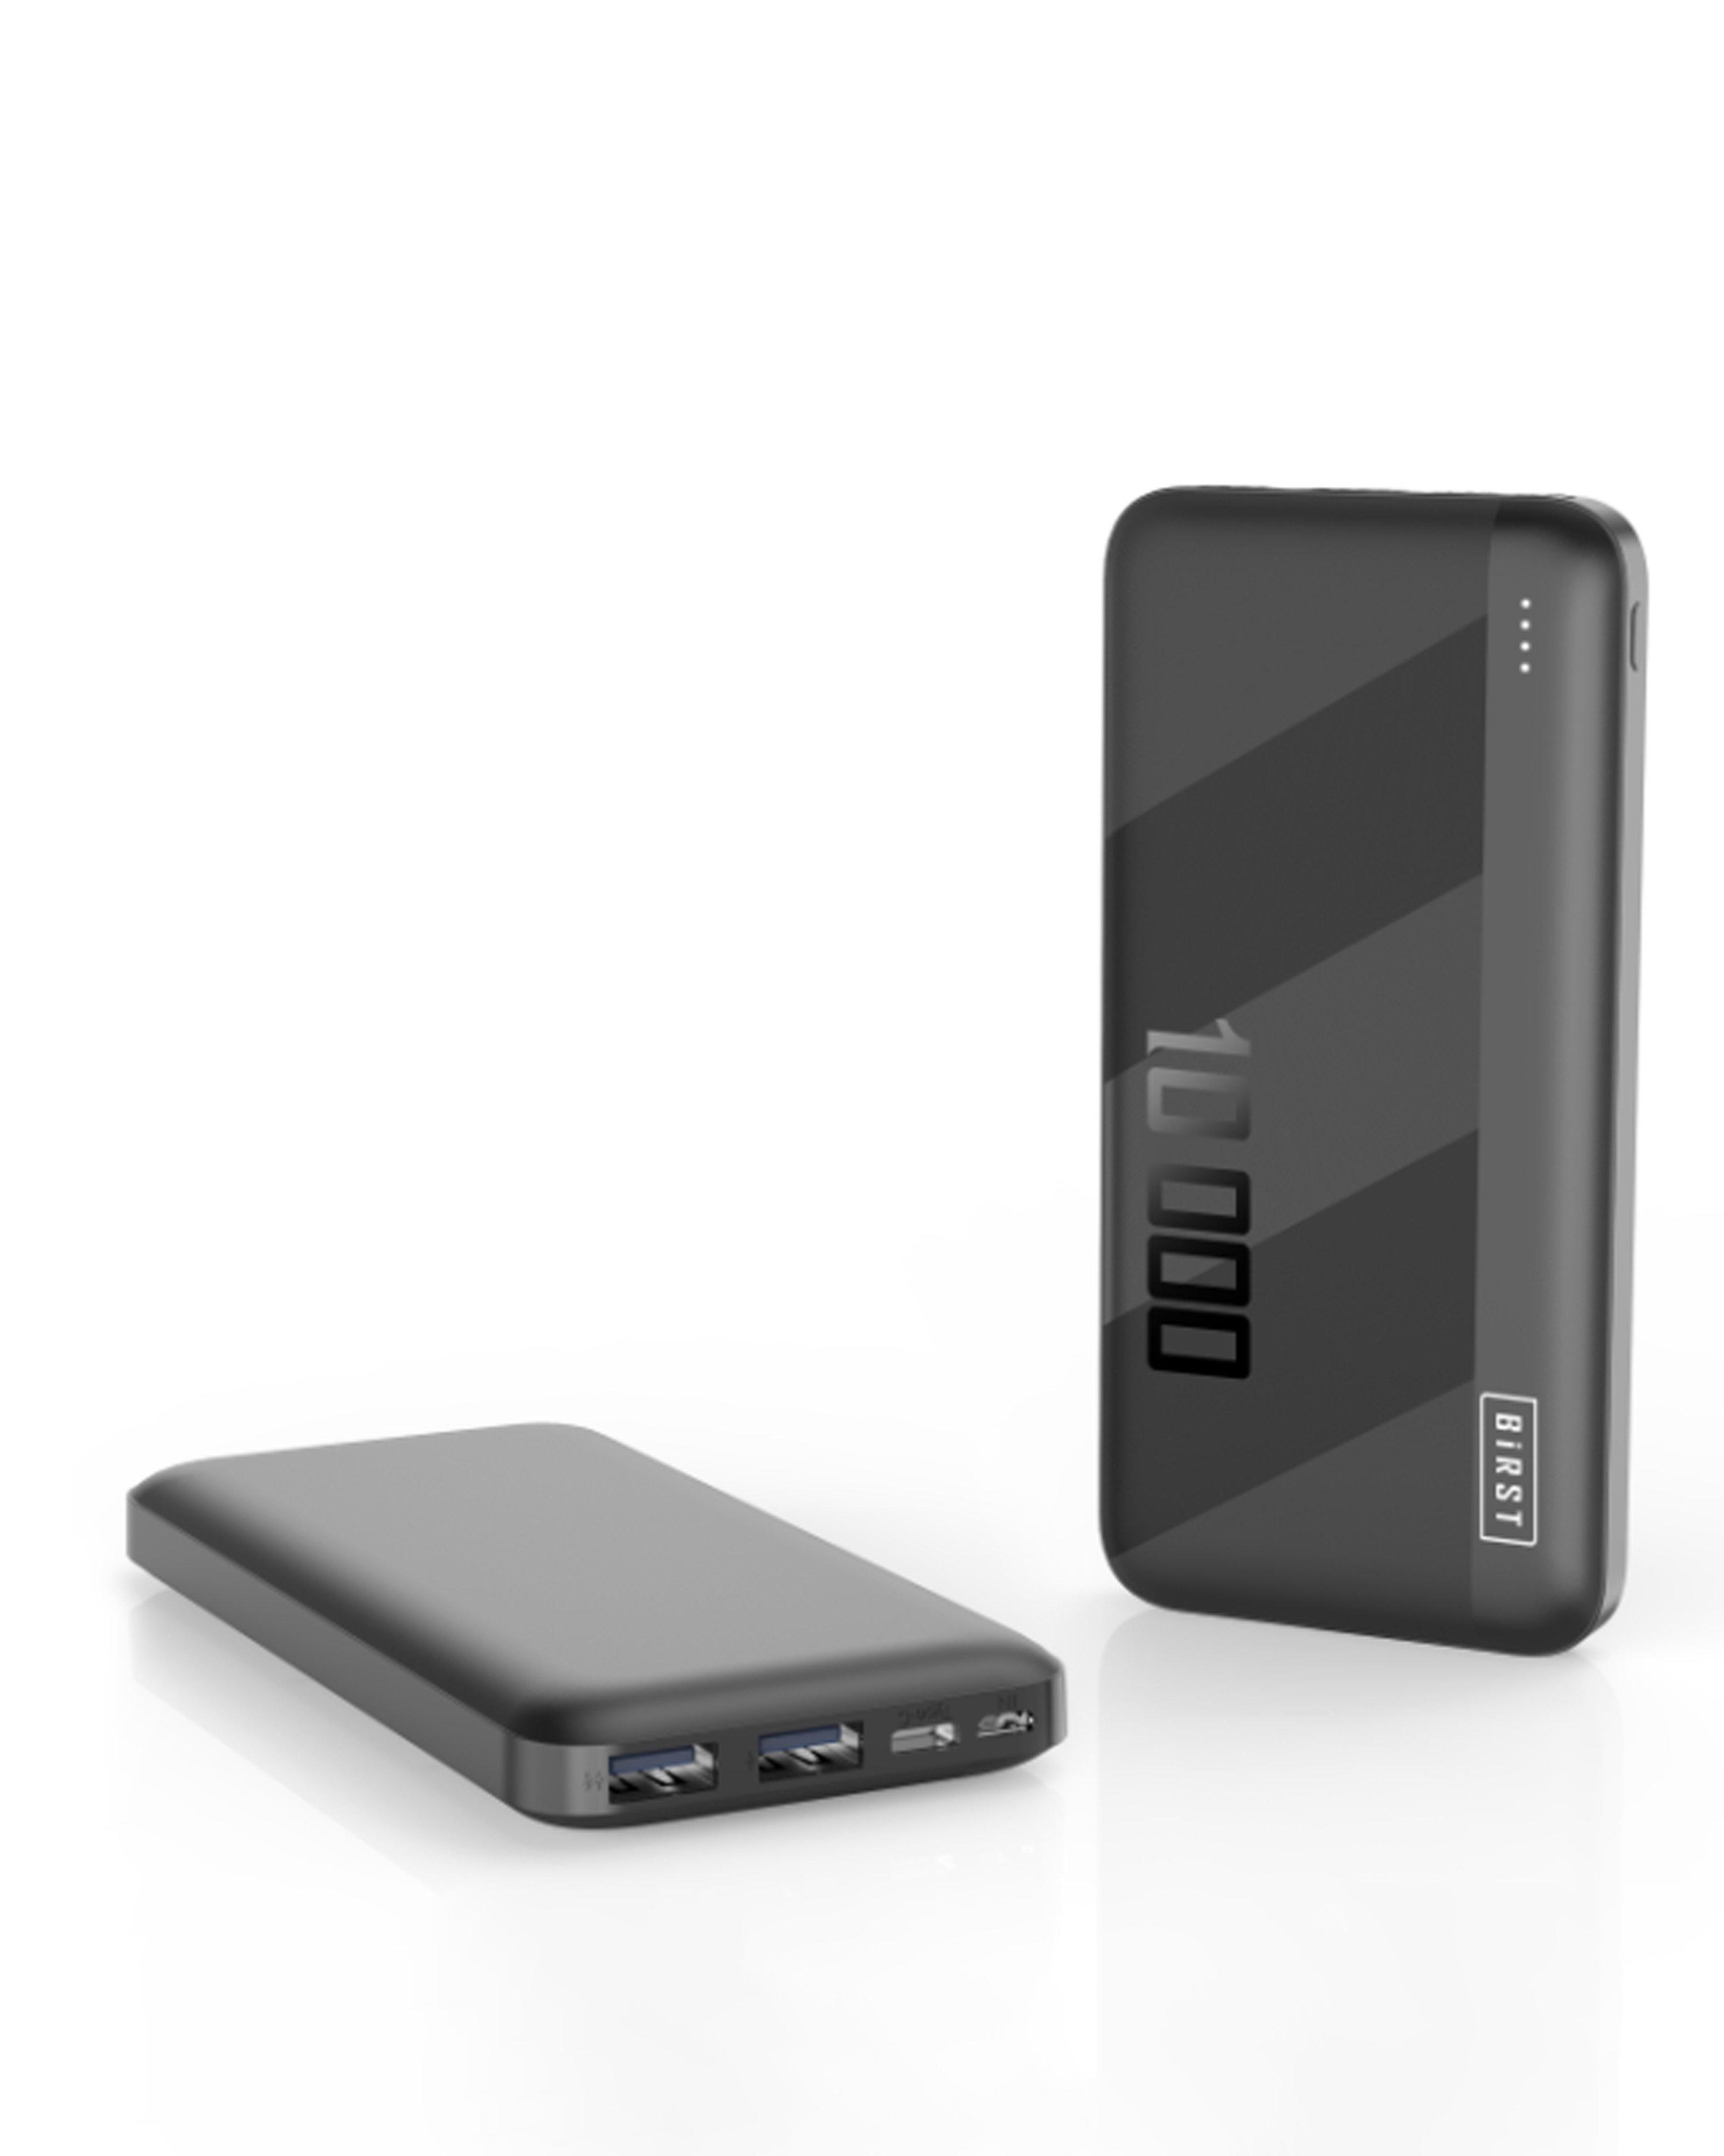 Birst 10 000mAh Power Bank + 3-in-1 Cable -  Black